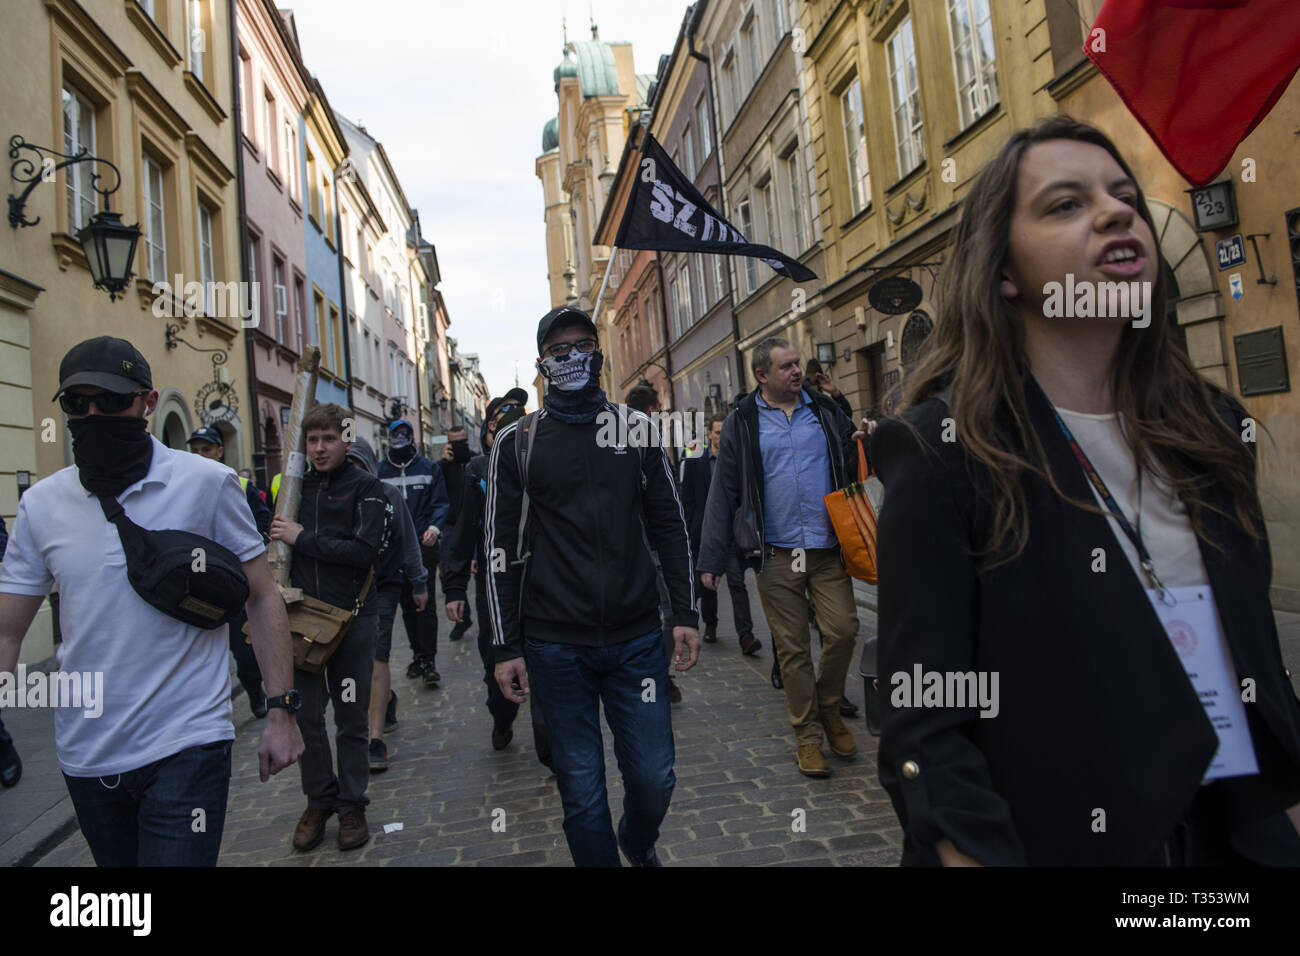 April 6, 2019 - Warsaw, Mazowieckie, Poland - Nationalists seen with flags and masks marching through the streets surrounded by police forces during the protest.''Universities free from Marxism'' a protest against the Warsaw University to express their opposition to the activity of leftist extremists and other cases of left-wing indoctrination of Polish students. In the same place, students, leftist and anti-fascist activists gathered under the slogan ''Here we learn, do not heil''. Both groups were separated by a large police cordon. (Credit Image: © Attila Husejnow/SOPA Images via ZUMA Wire Stock Photo